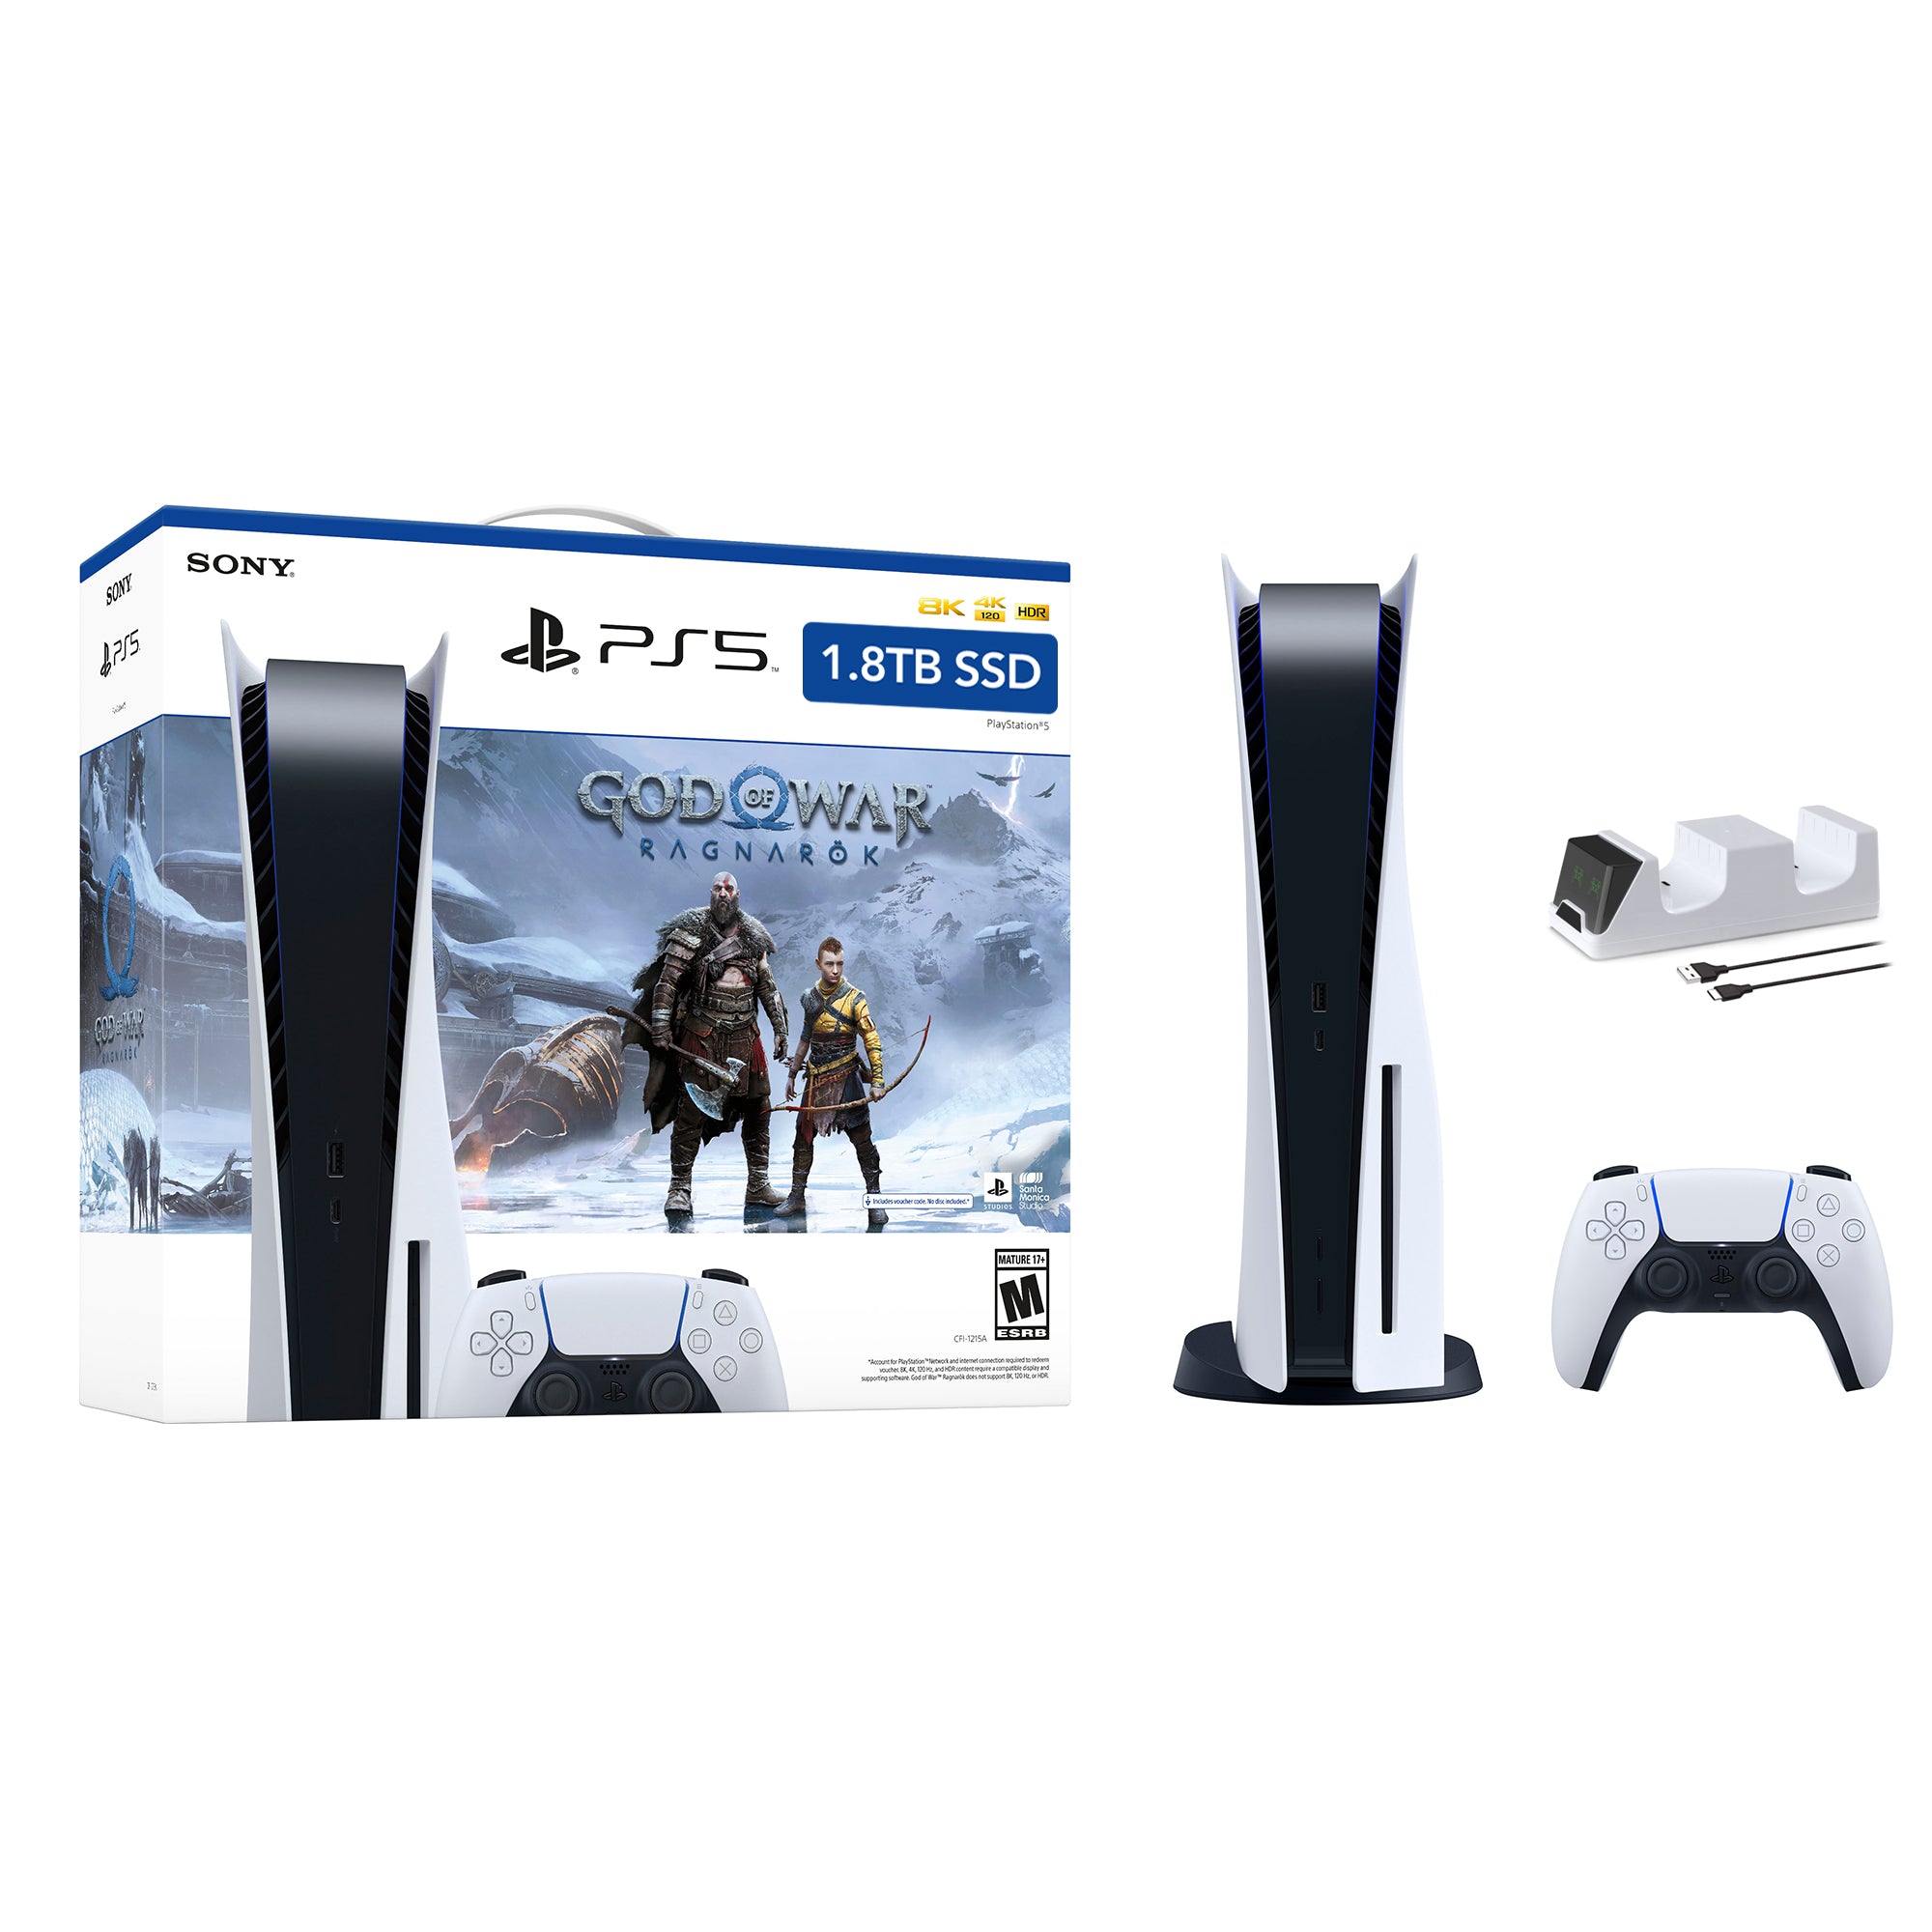 PlayStation 5 Upgraded 1.8TB Disc Edition God of War Ragnarok Bundle and Mytrix Controller Charger - White, PS5 Gaming Console